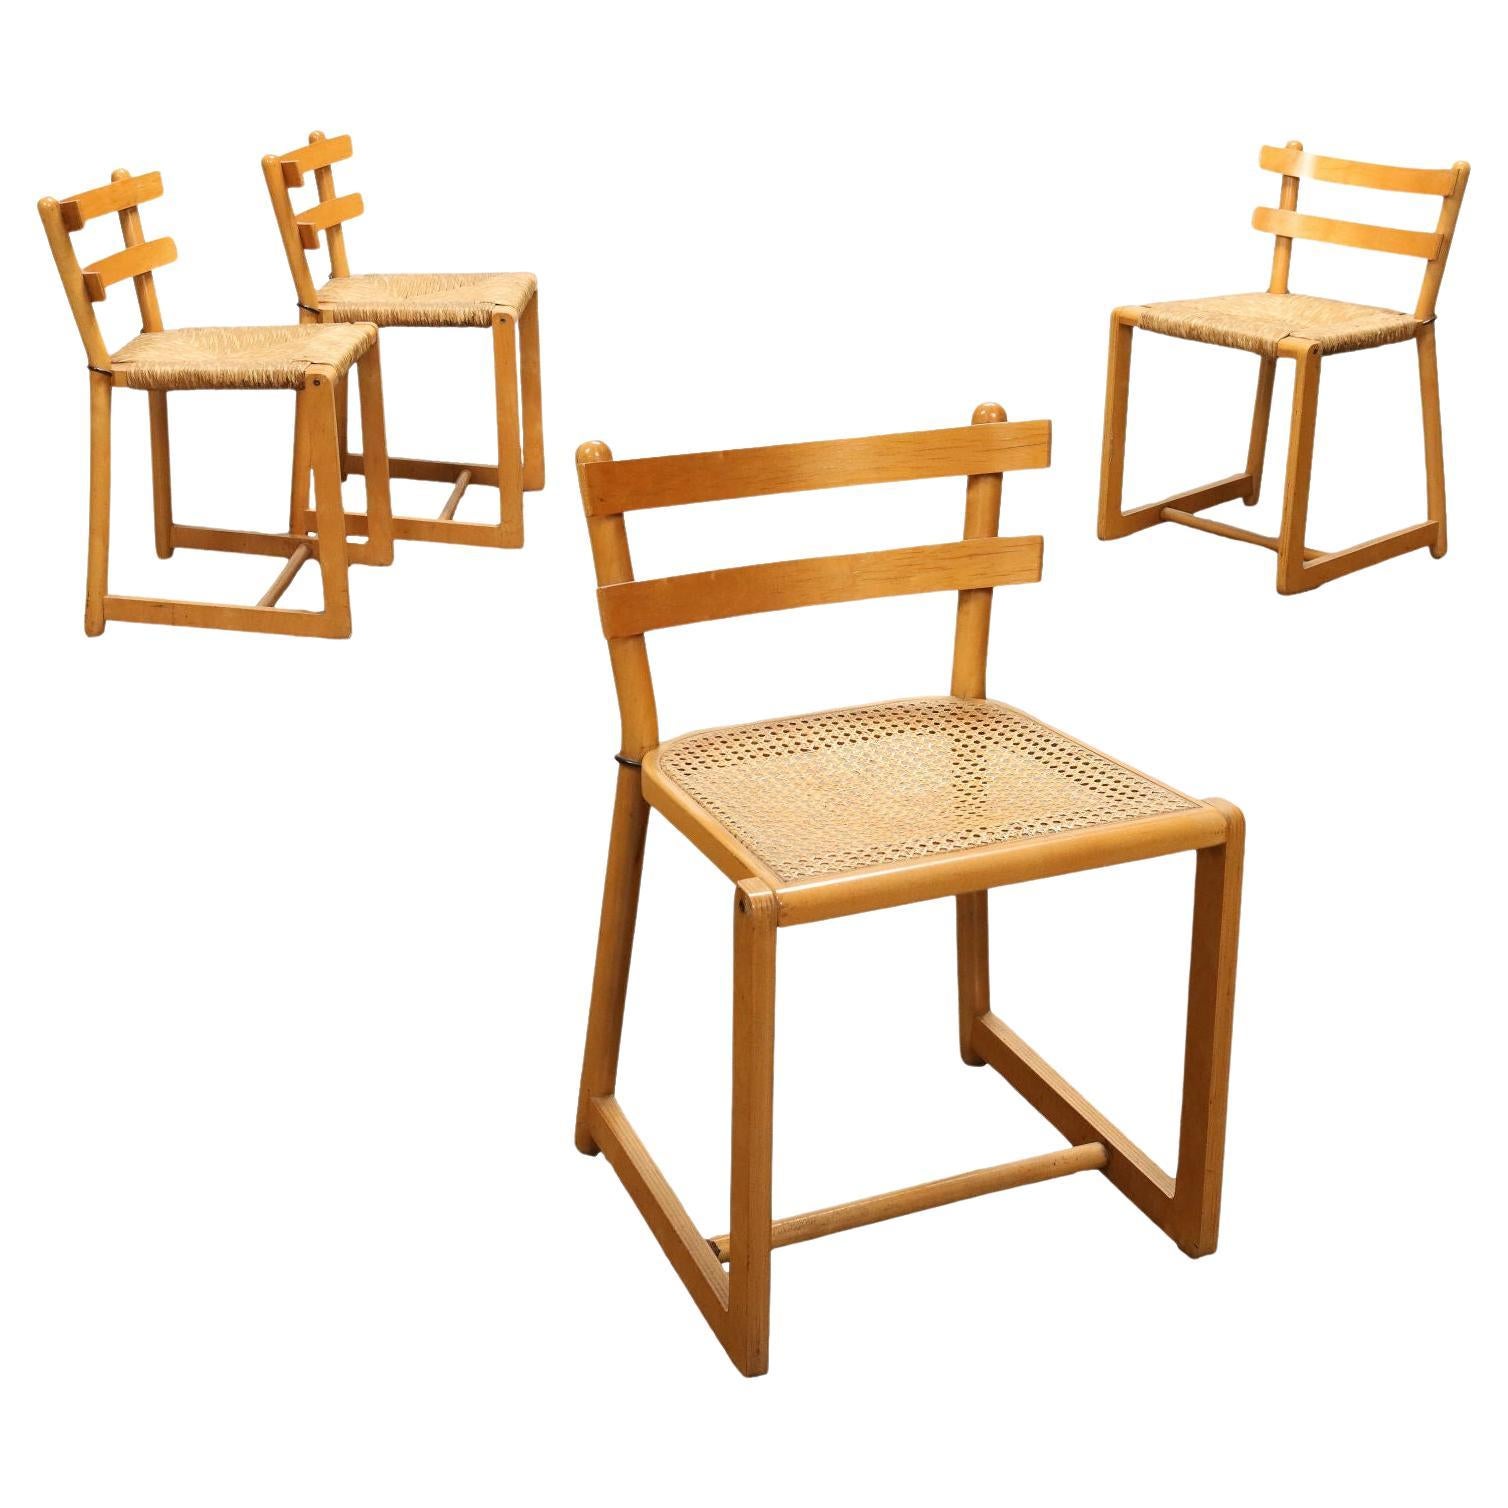 Group of four 1980s Chairs, beech and plywood